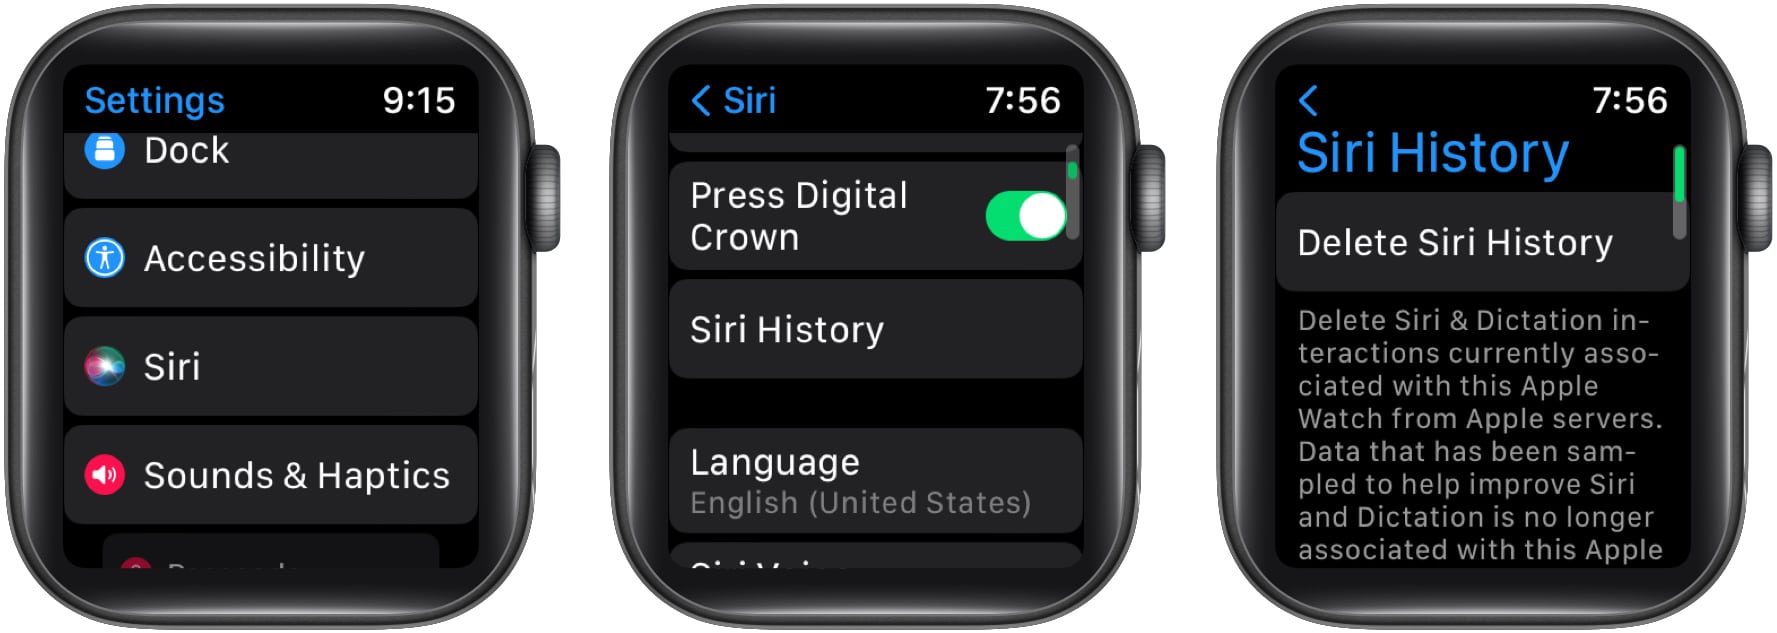 How to delete Siri history on Apple Watch